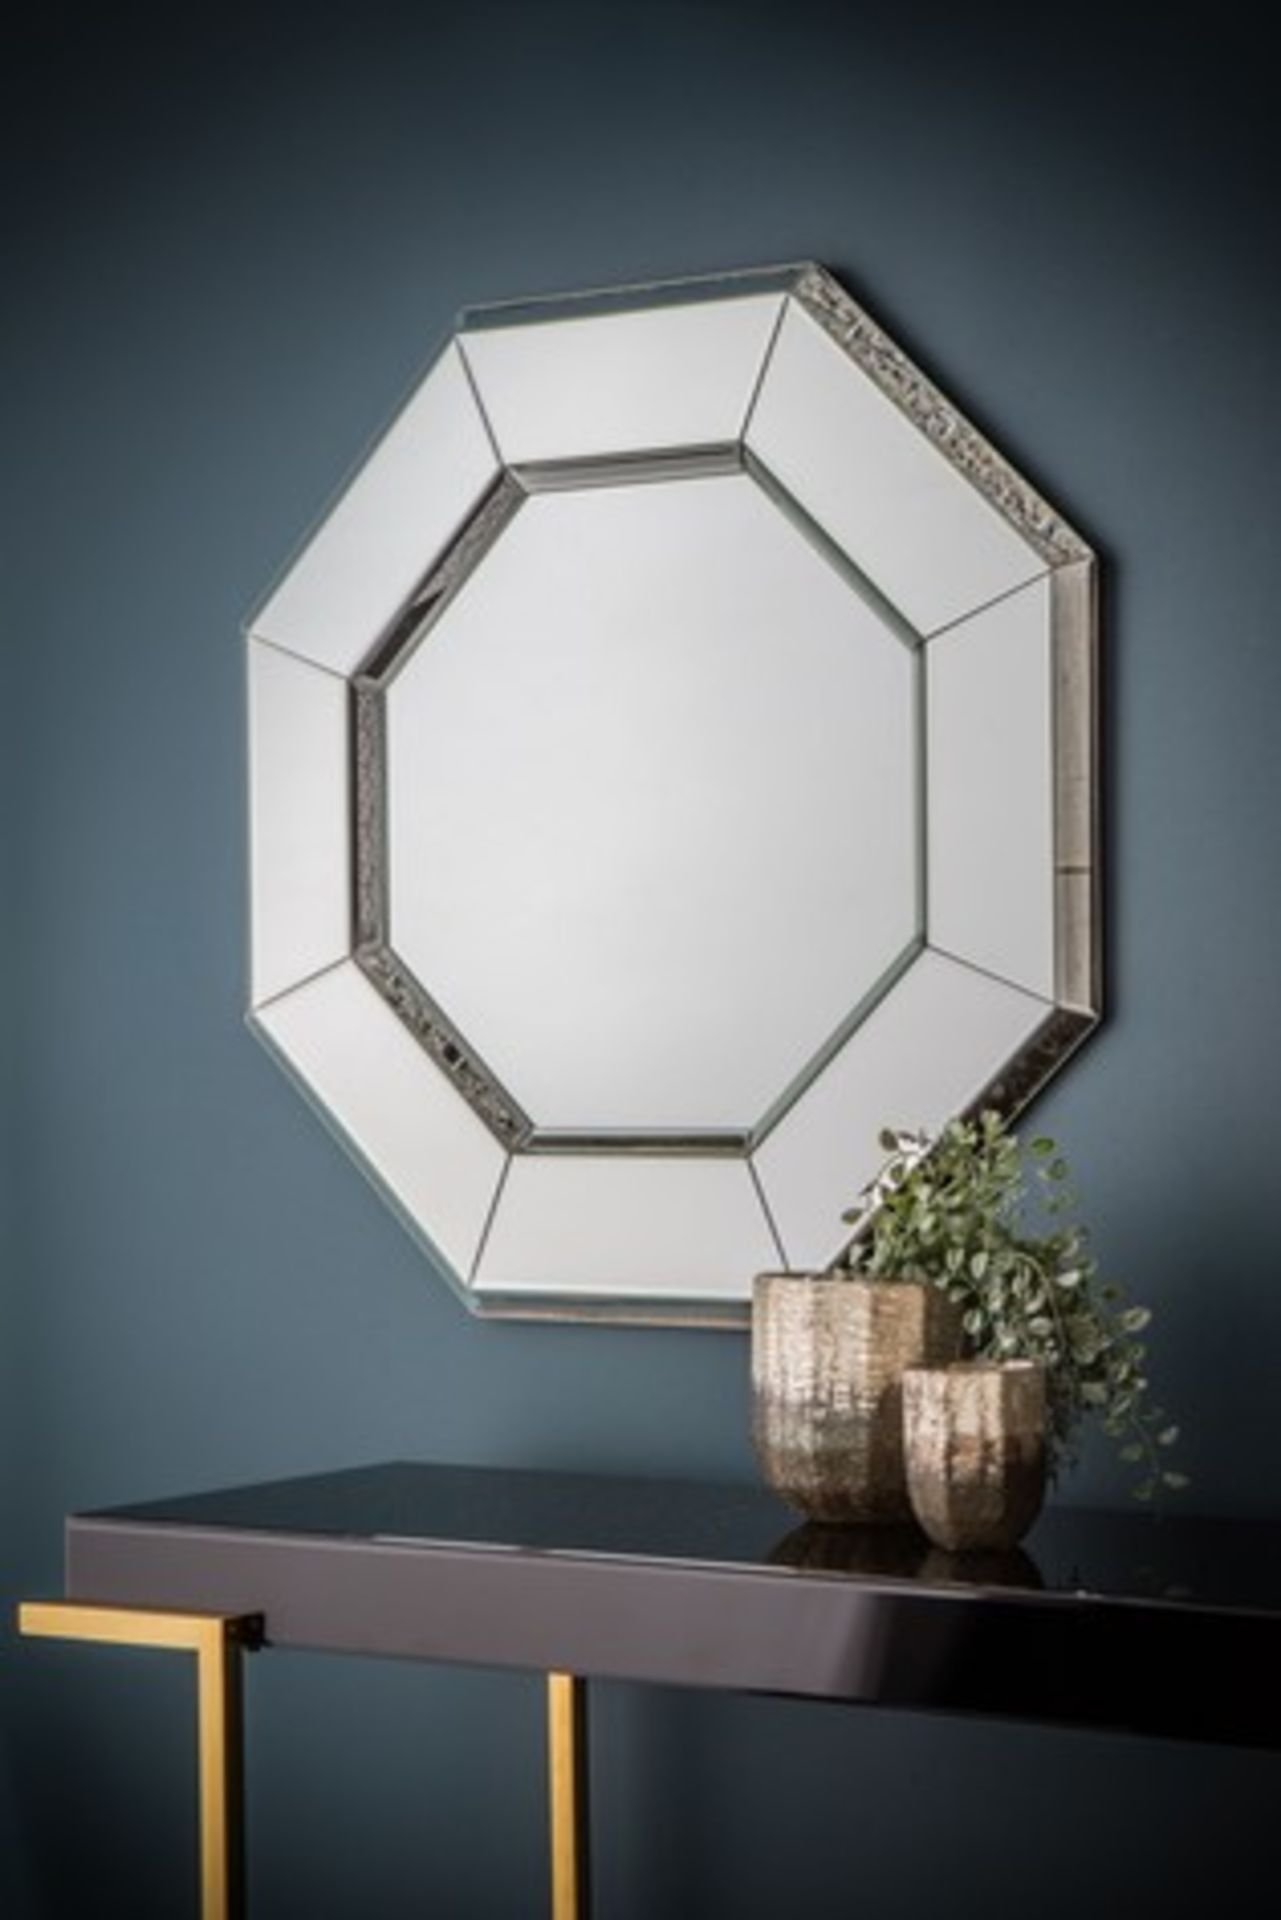 Vienna Octagon Mirror 800 x 800mm This Simply Designed Octagonal Mirror Is The Mirror You Need In